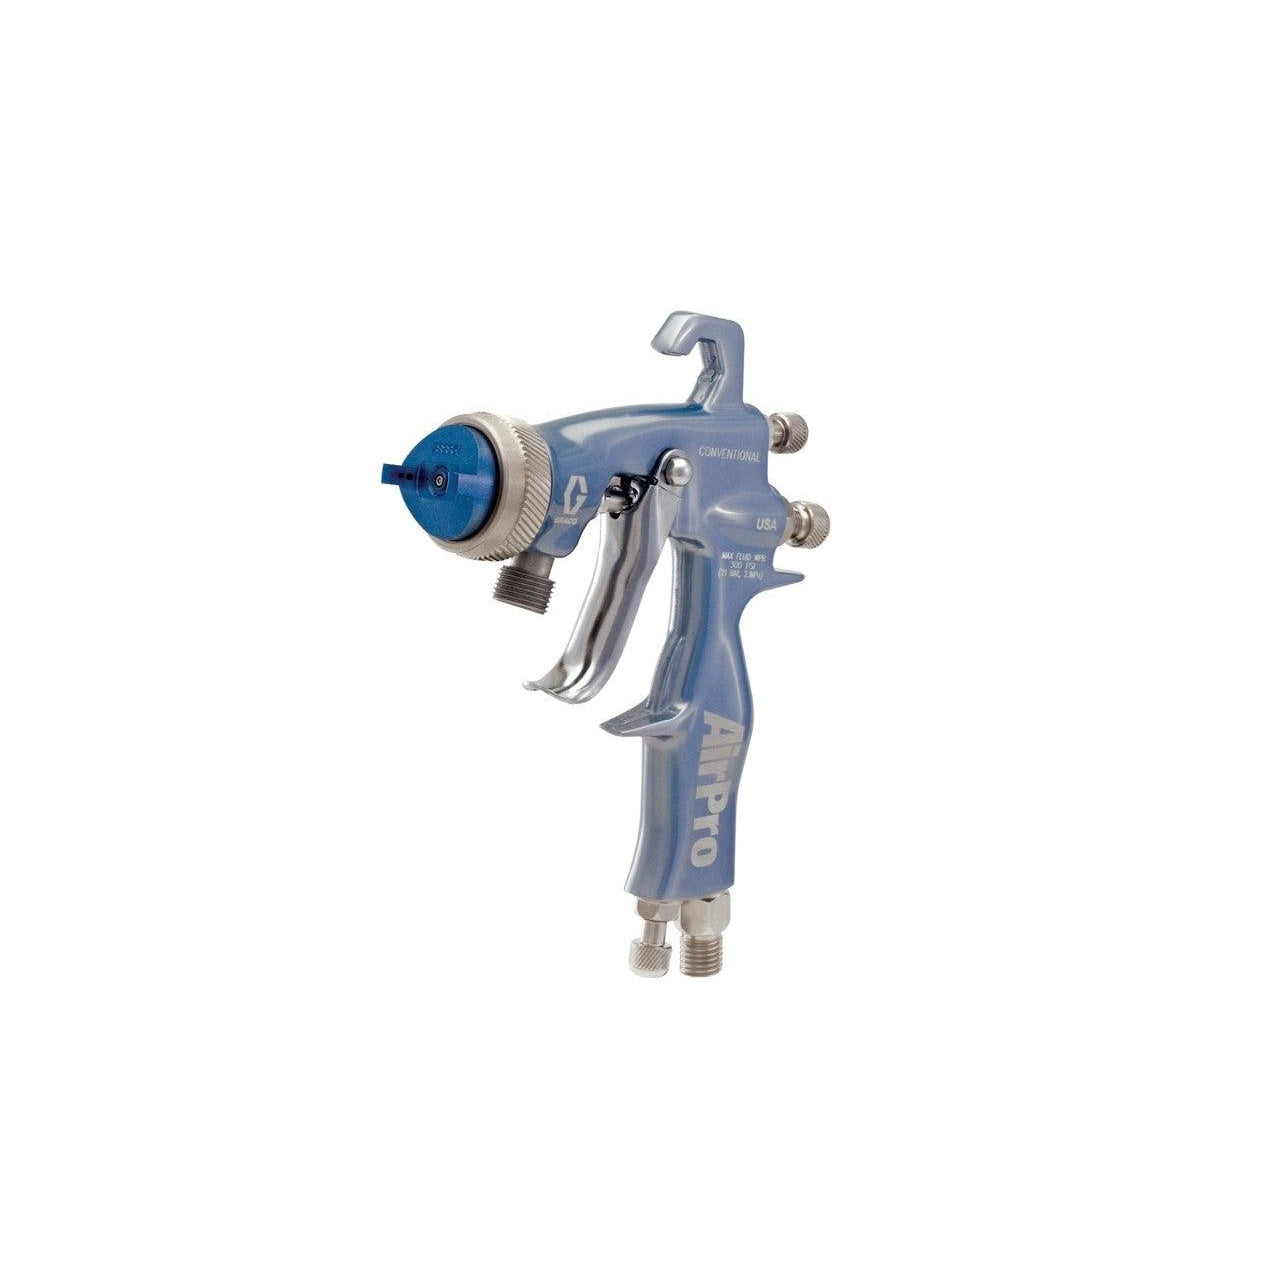 AirPro Air Spray Pressure Feed Gun, Conventional, 0.042 inch (1.1 mm) Nozzle, for Automotive Applications